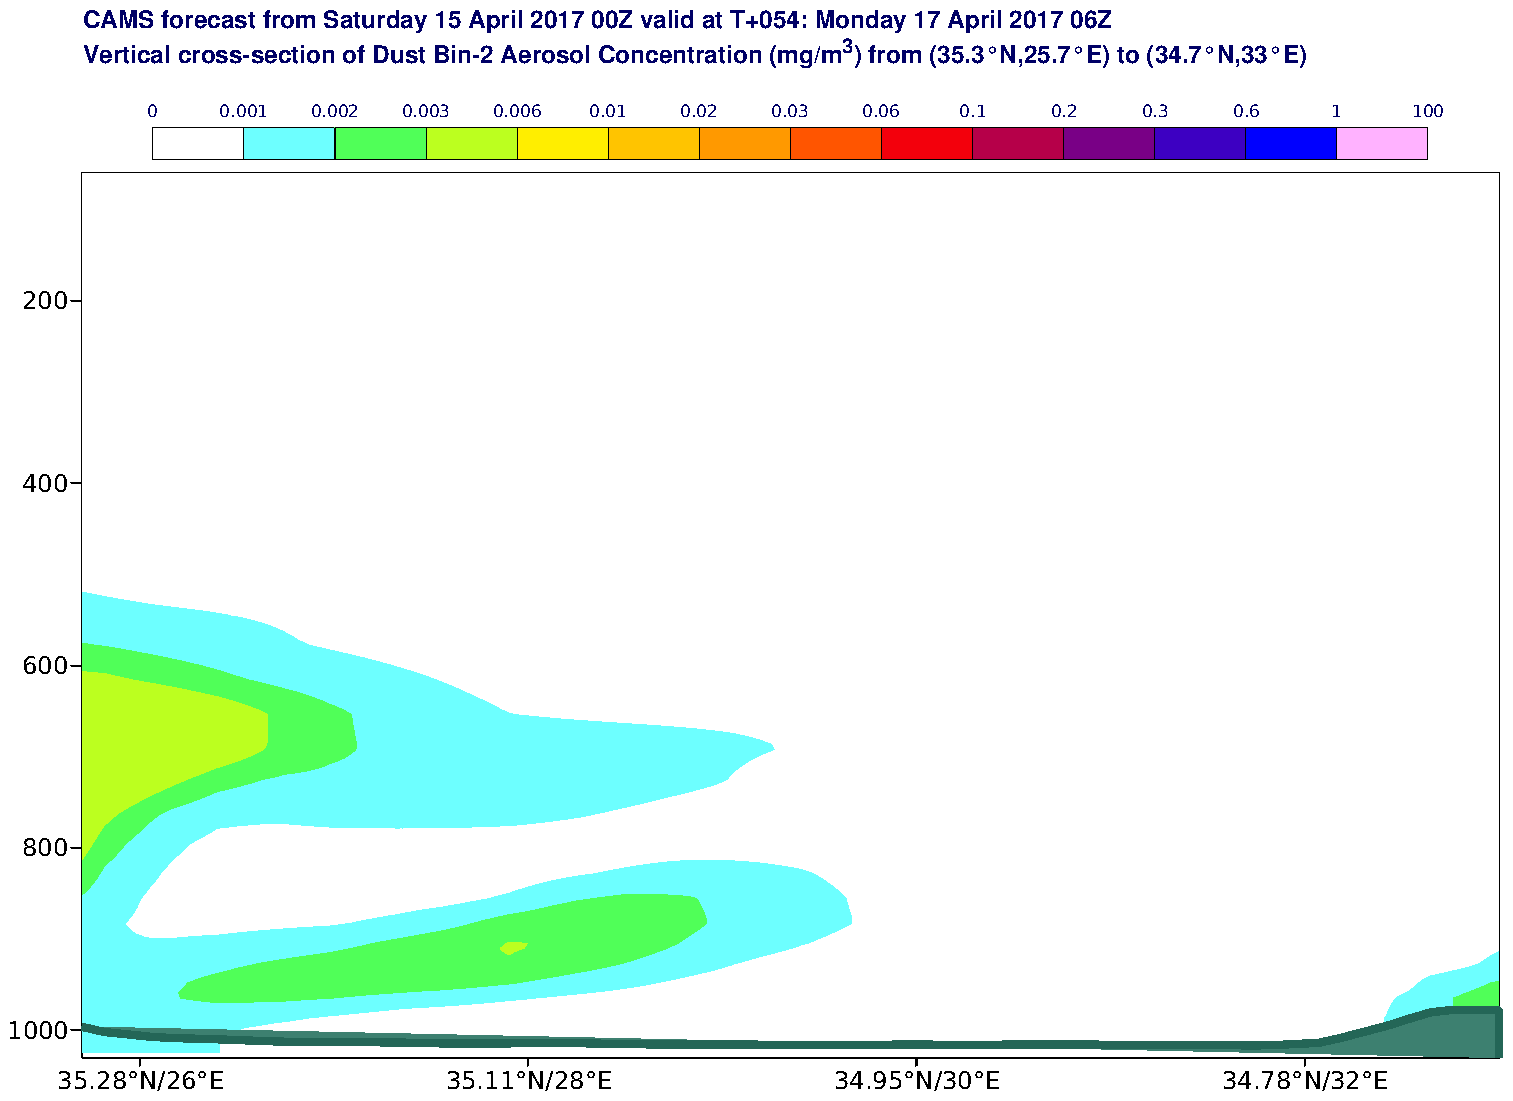 Vertical cross-section of Dust Bin-2 Aerosol Concentration (mg/m3) valid at T54 - 2017-04-17 06:00